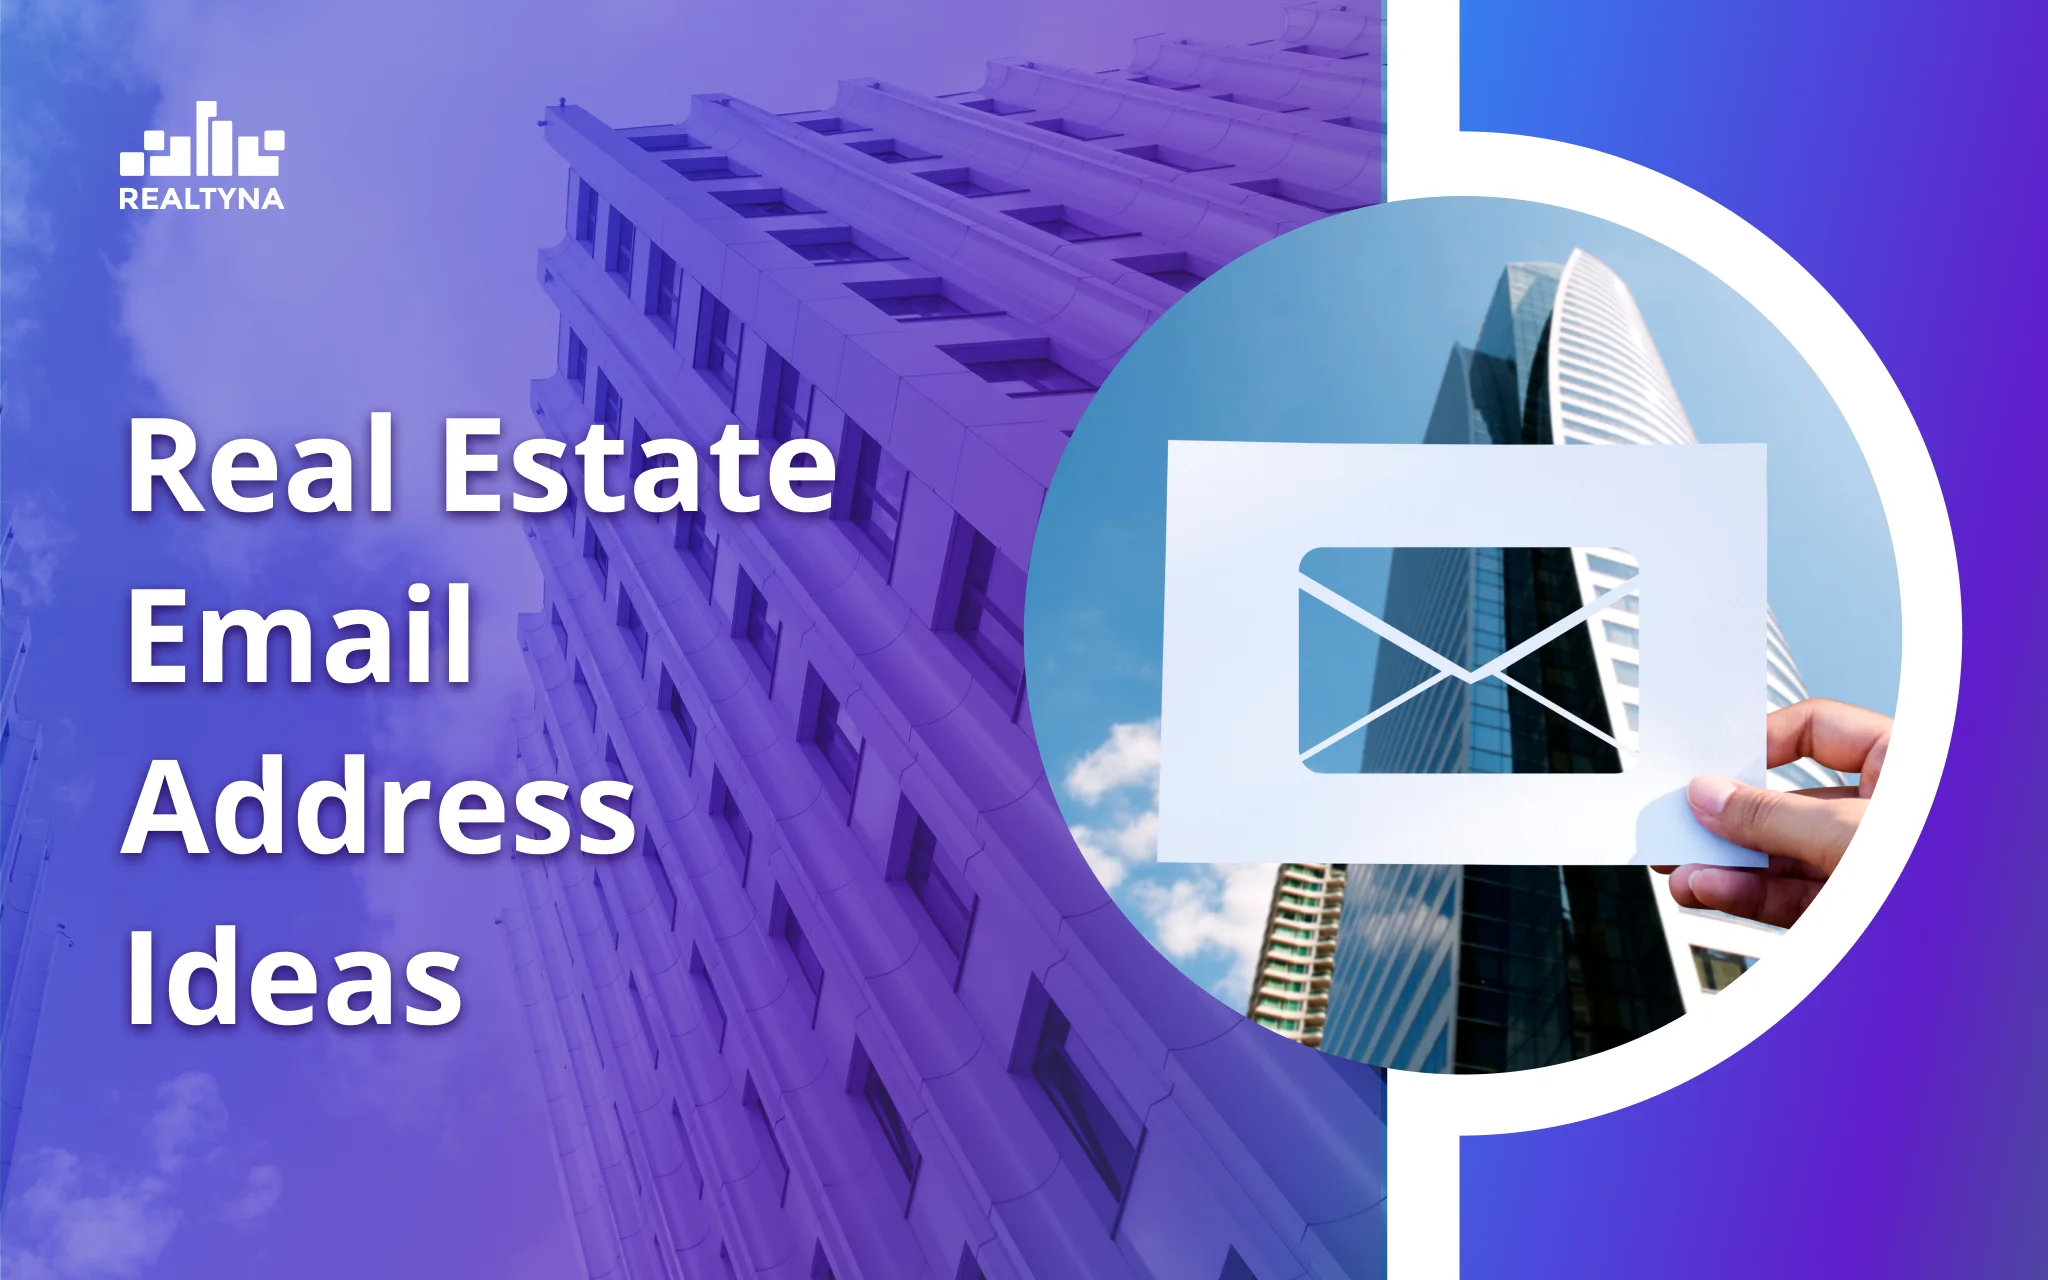 Real Estate Email Address Ideas: Be Different